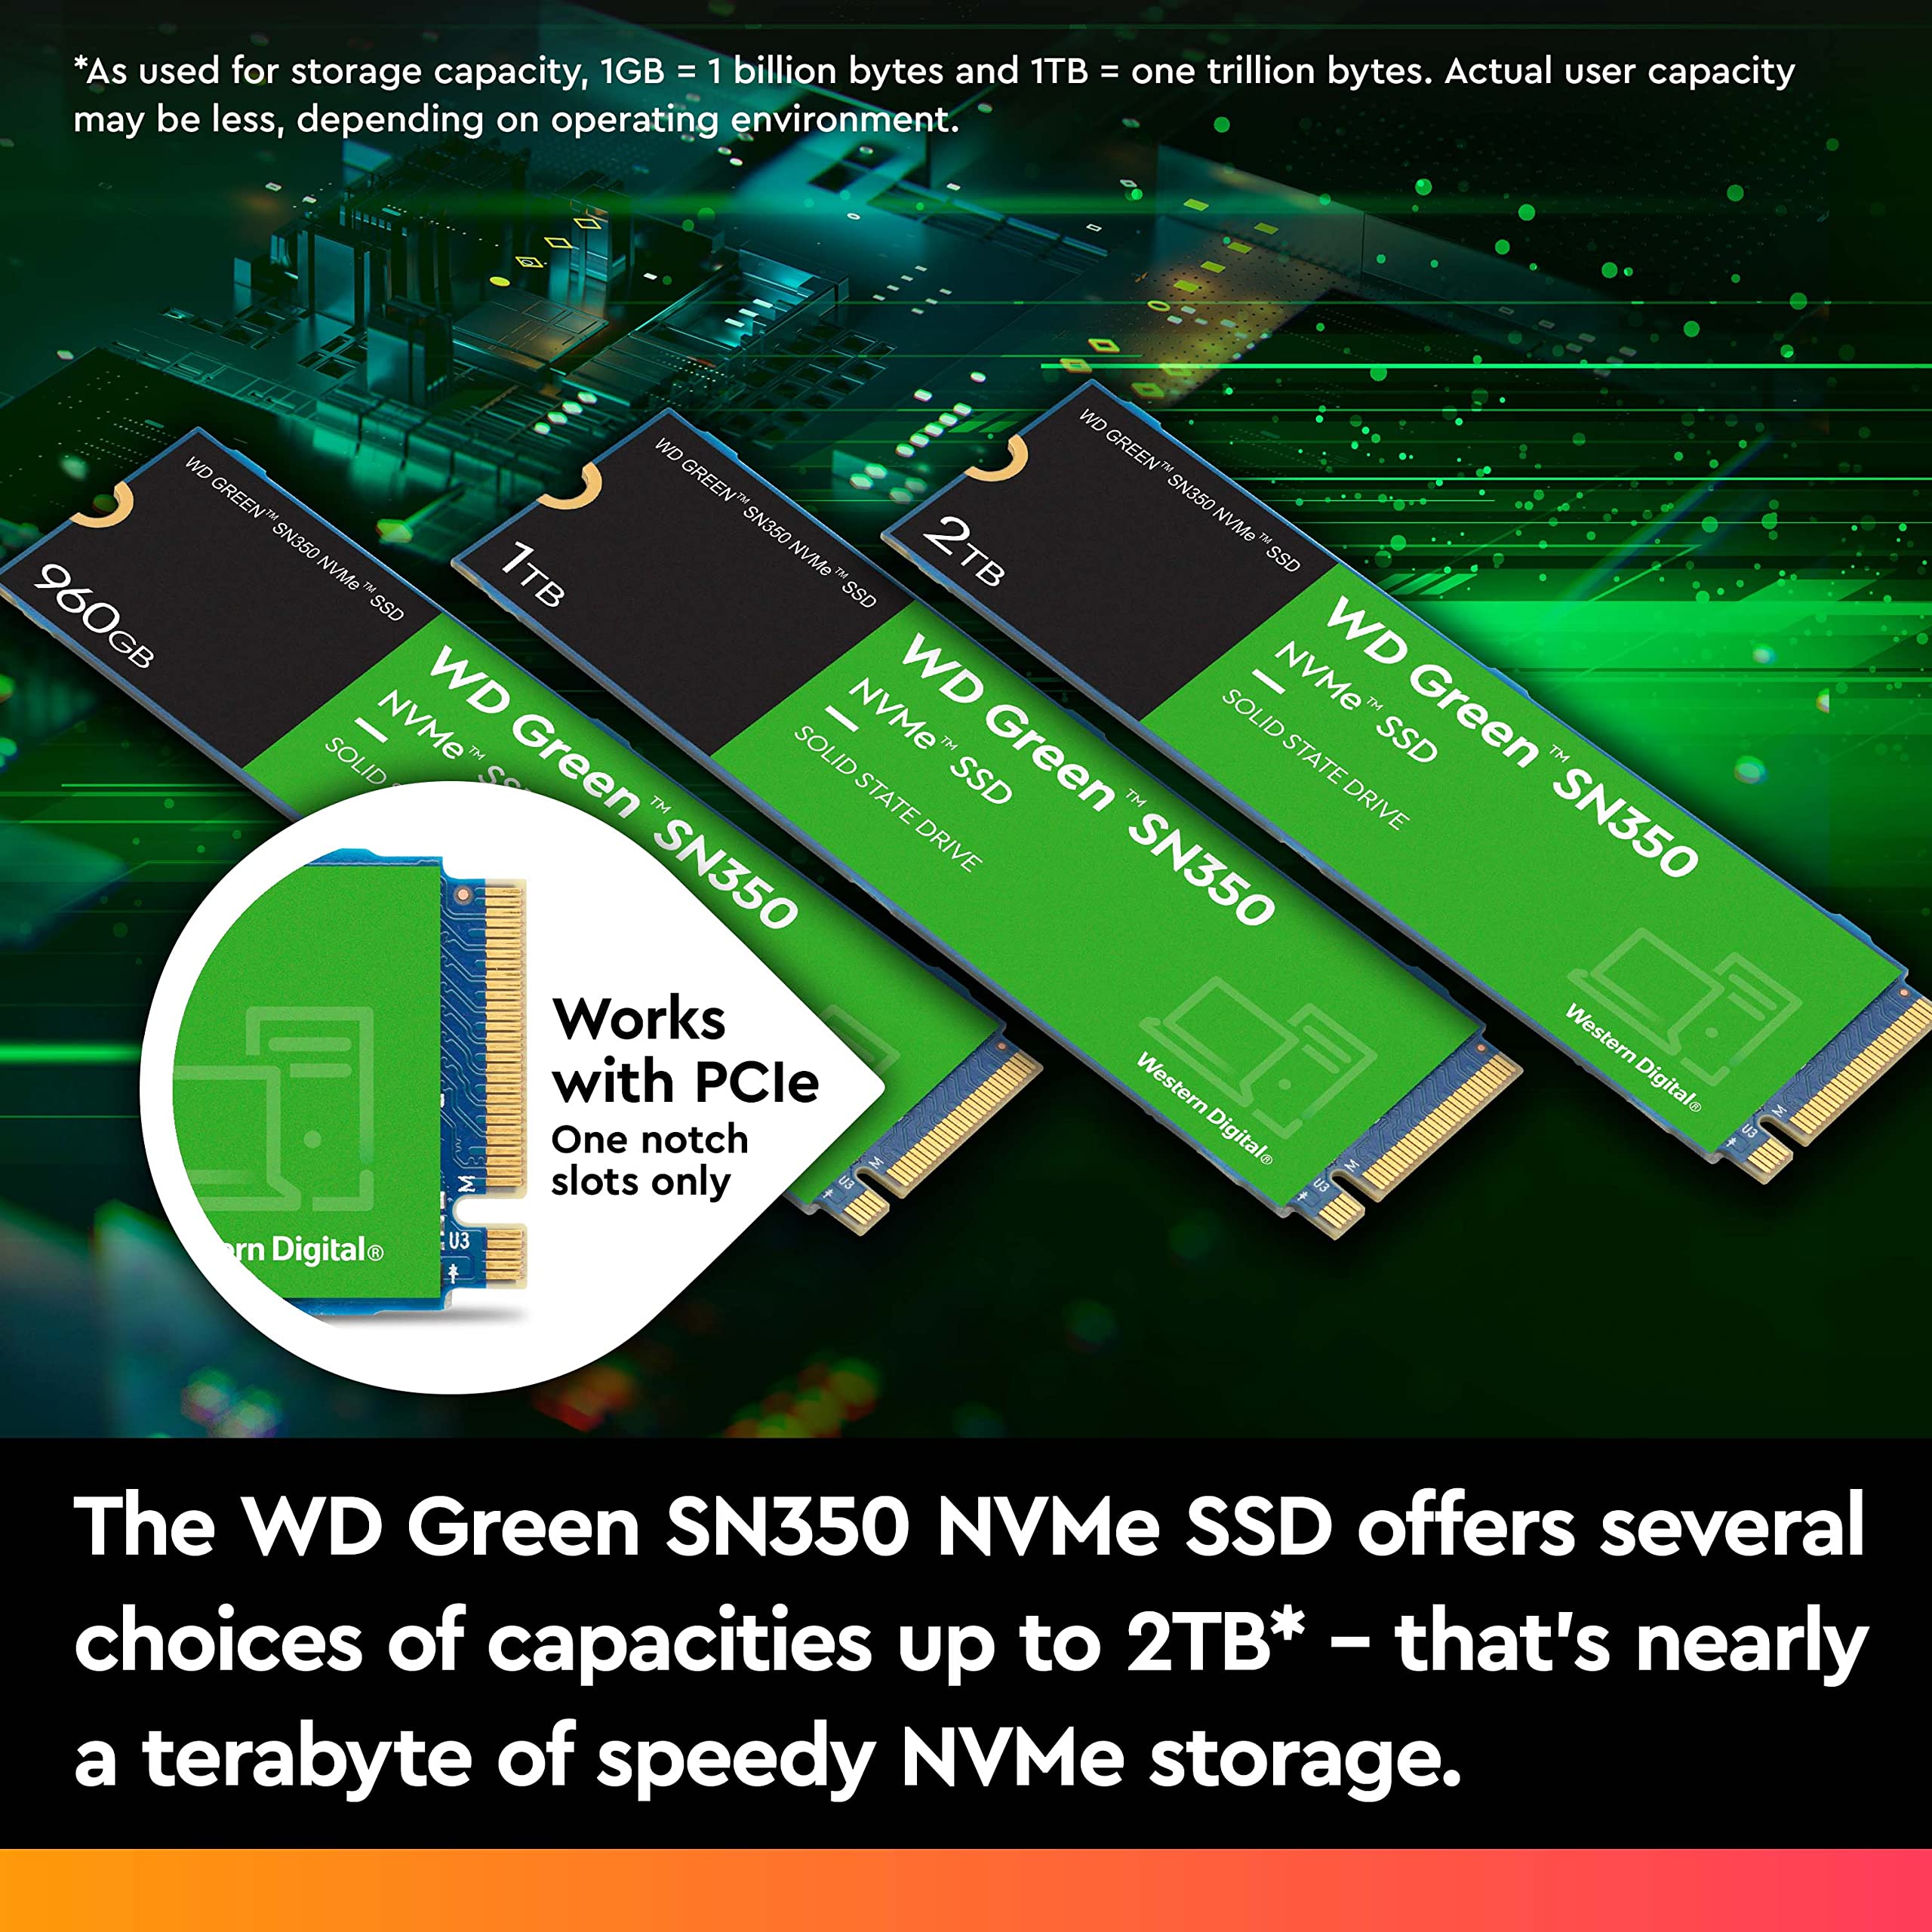 Western Digital 480GB WD Green SN350 NVMe Internal SSD Solid State Drive - Gen3 PCIe, M.2 2280, Up to 2,400 MB/s - WDS480G2G0C